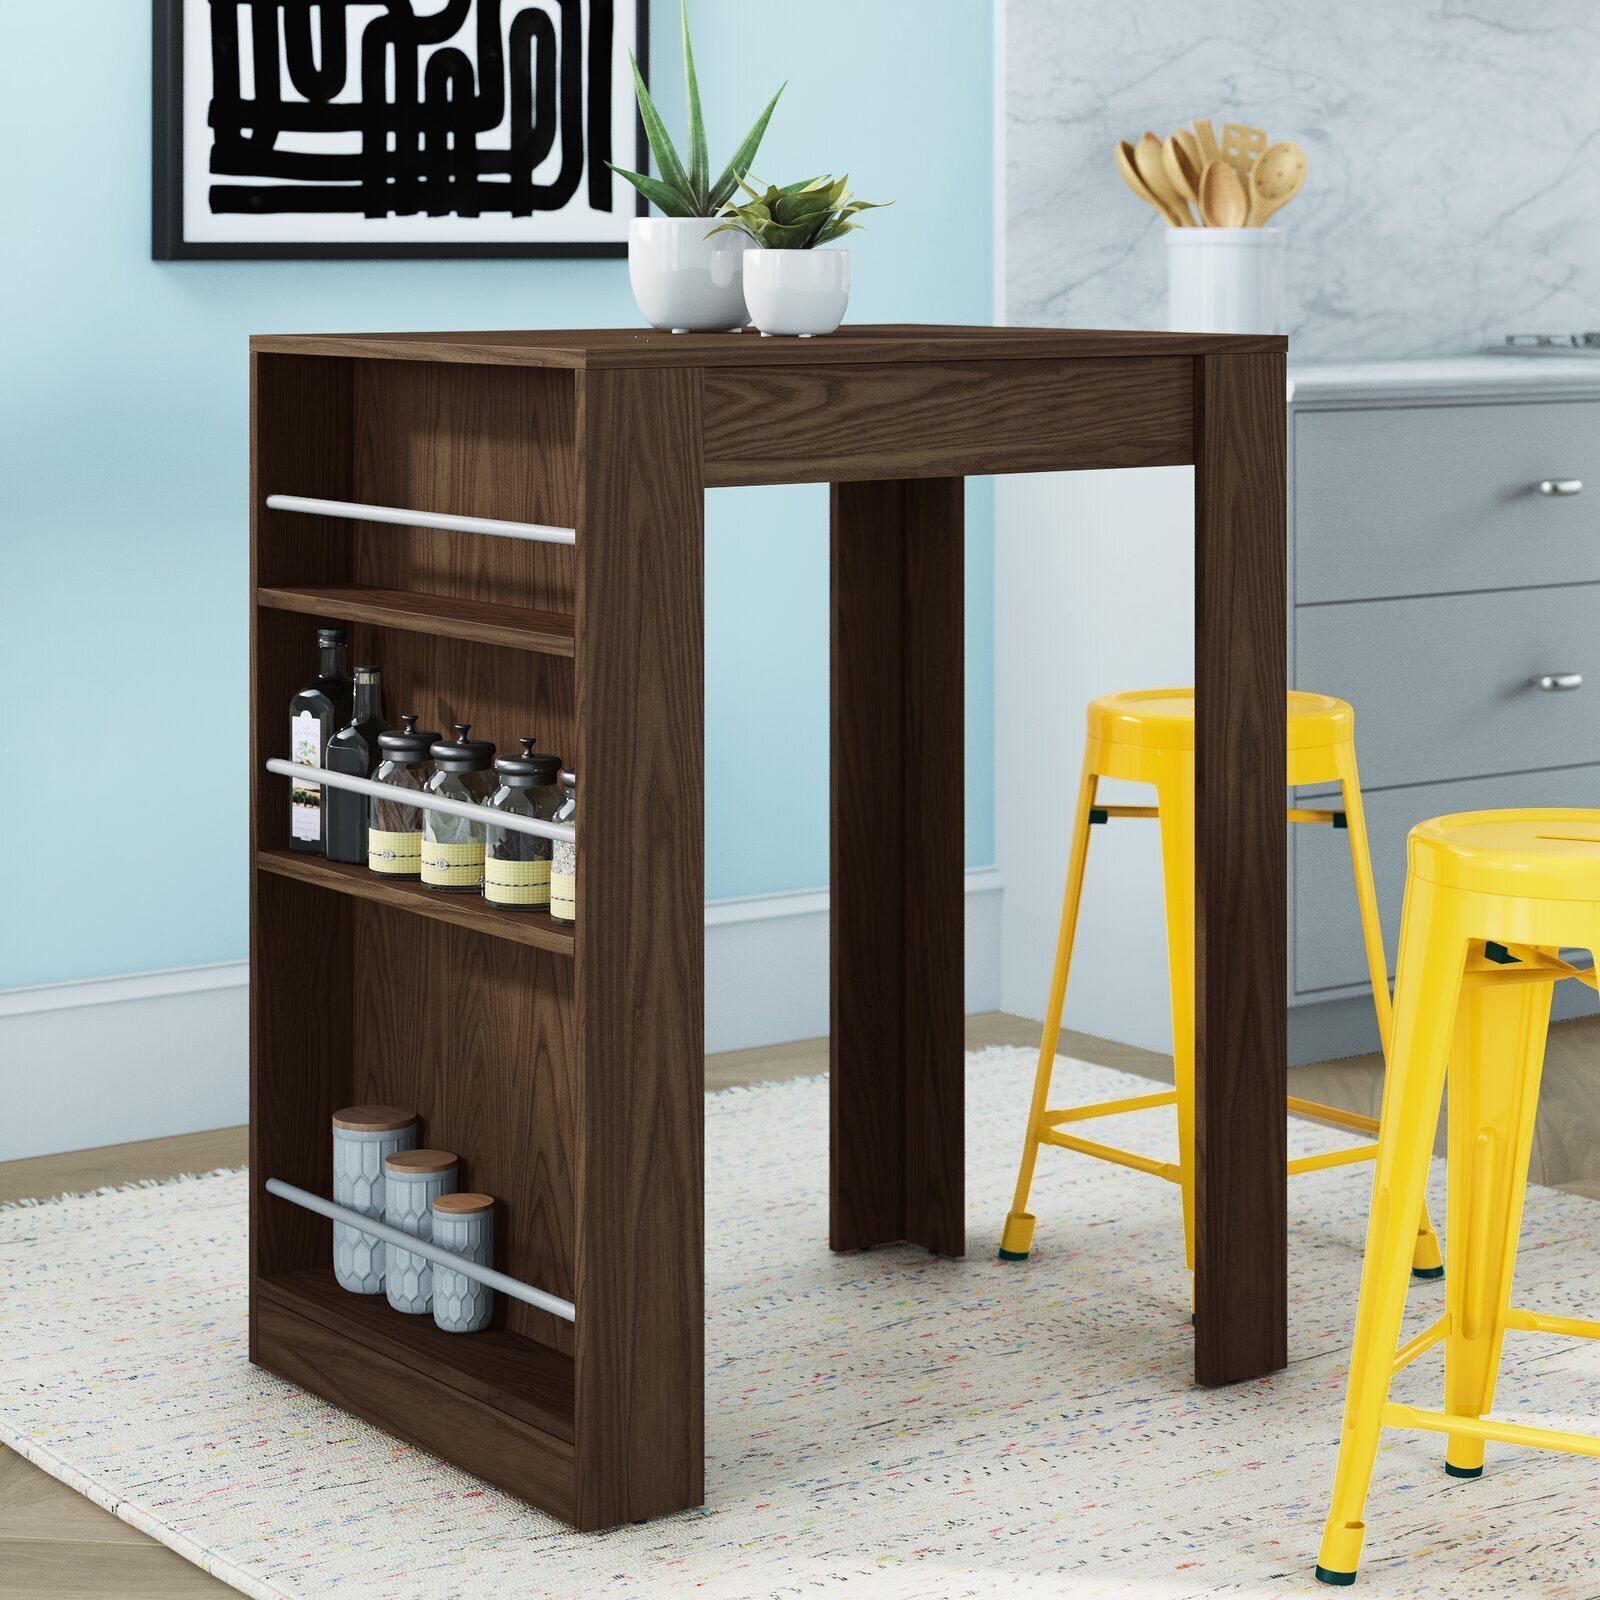 Pub table with storage for drinks and kitchen items